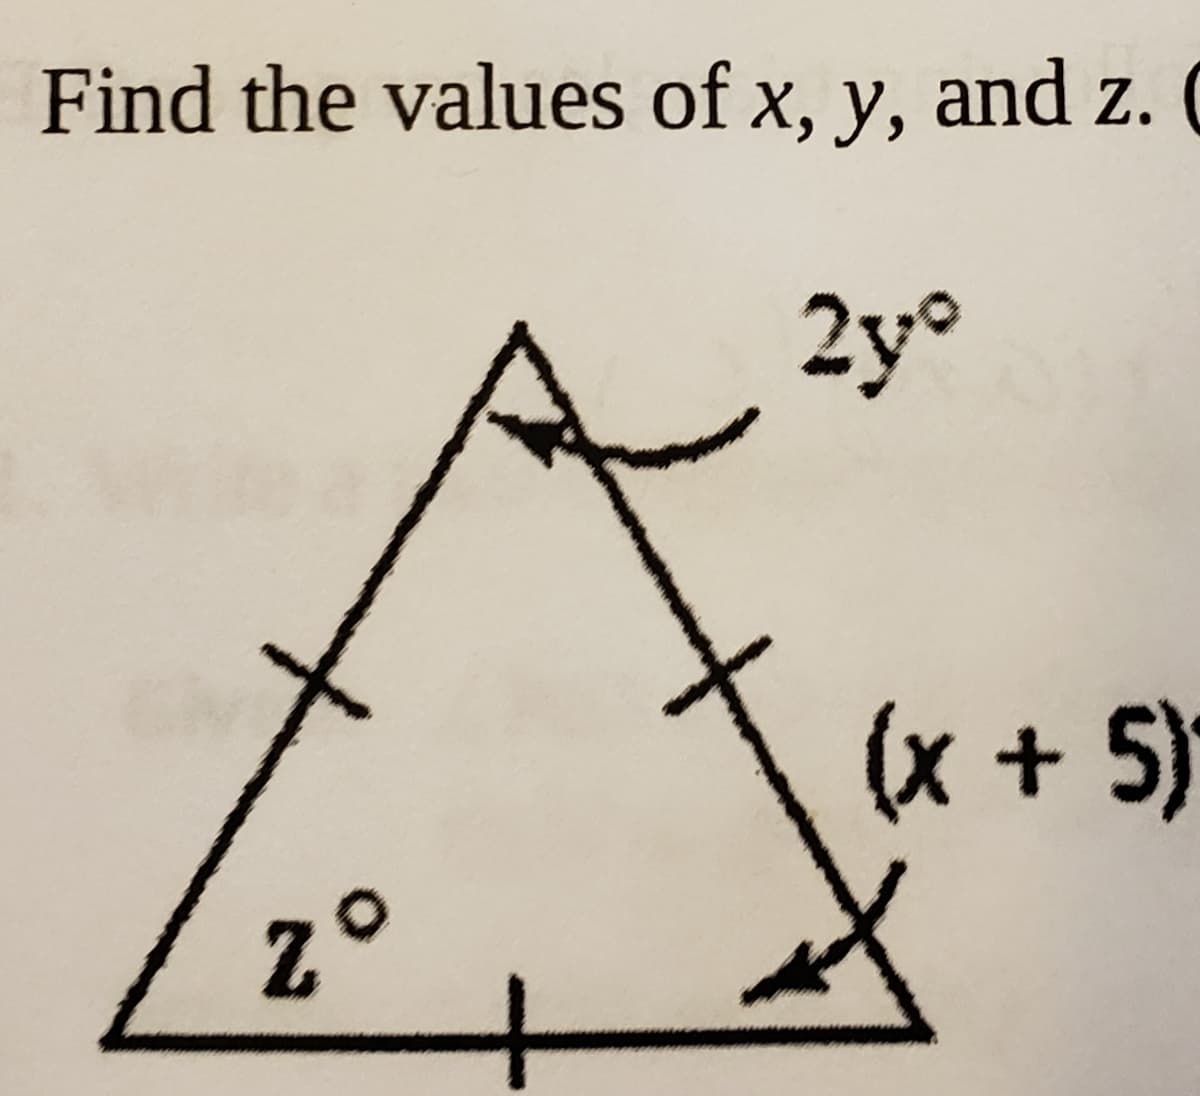 Find the values of x, y, and z.
2y°
(x + 5)
z°
